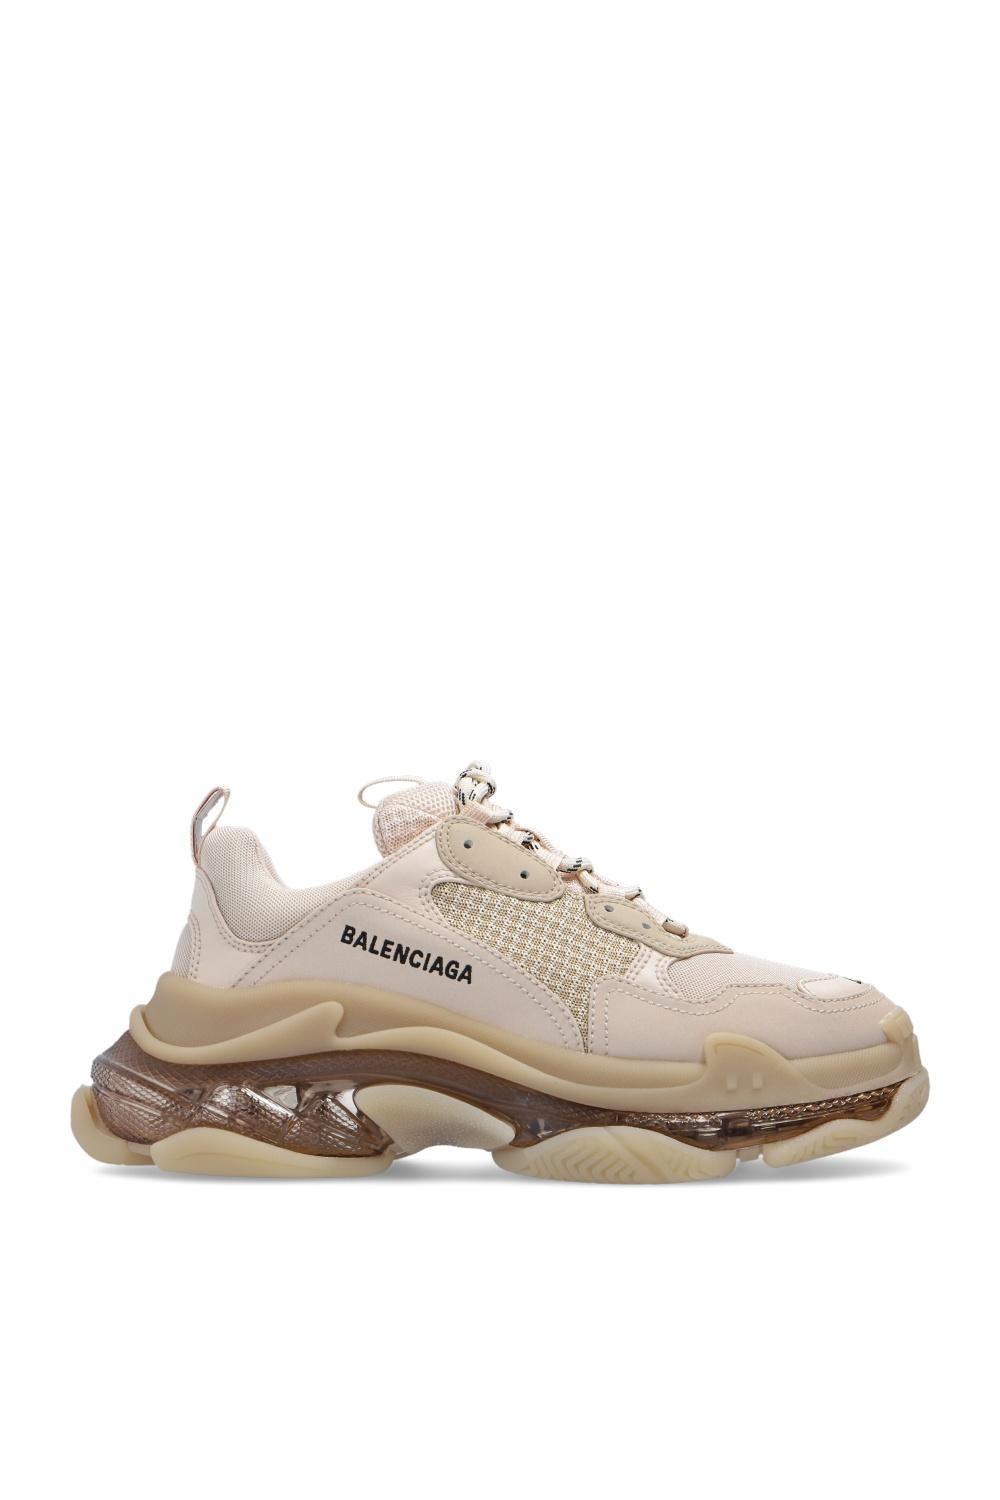 Balenciaga Leather Triple S Sneaker in Nude (Natural) - Save 20% - Lyst